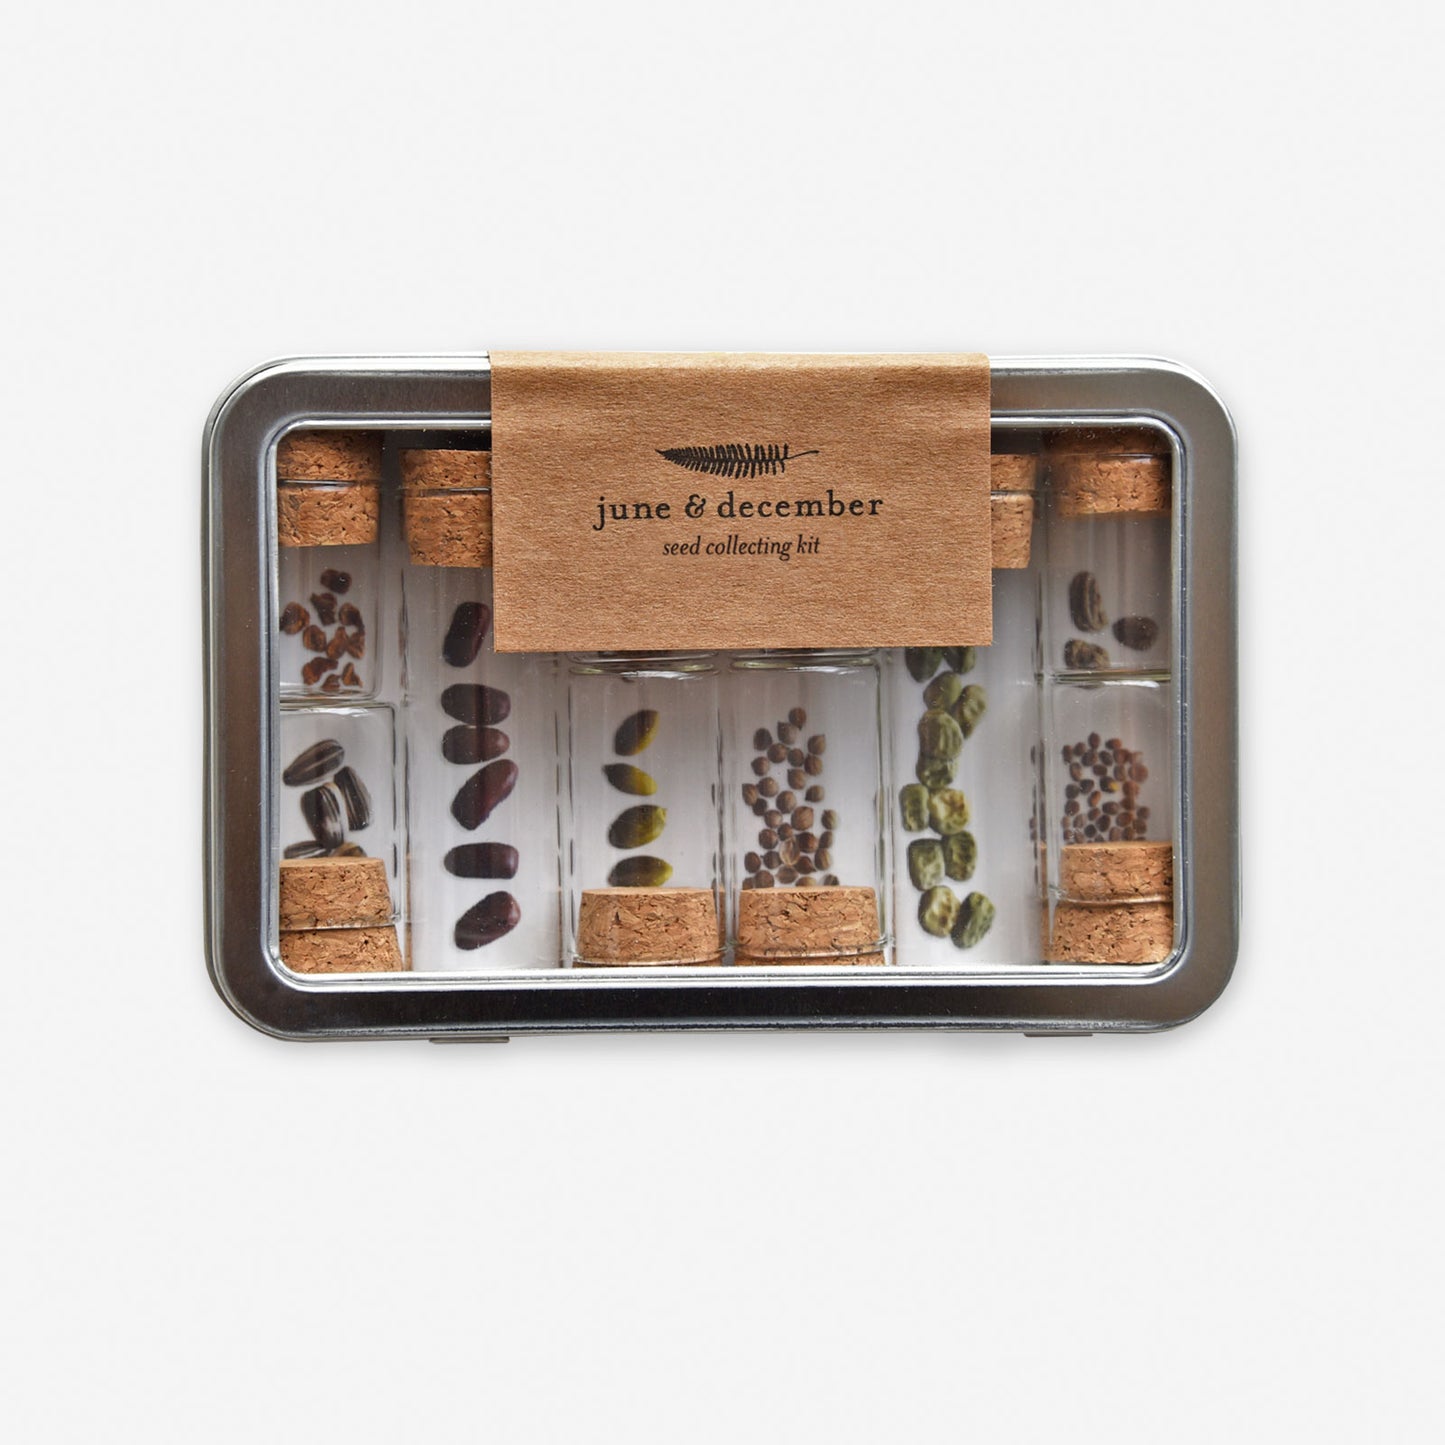 Seed Collecting Kit